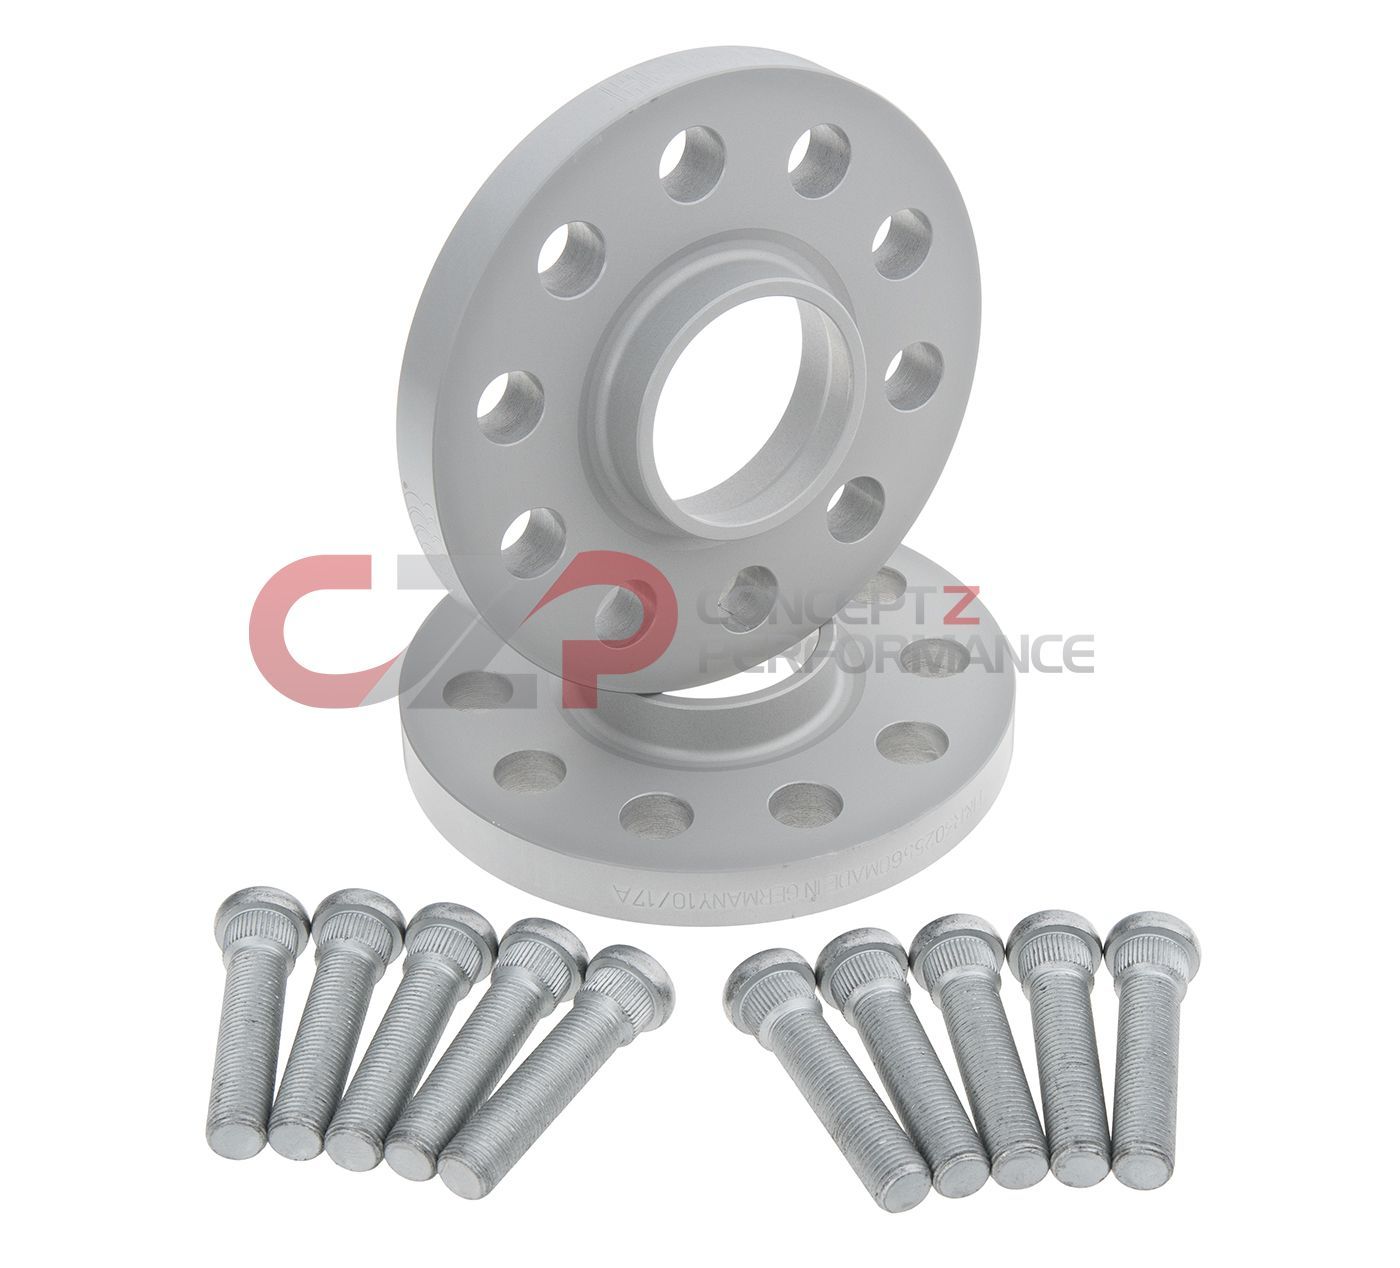 H&R DRS Series Trak+ Wheel Spacer Kit, 12x1.25, 5x114.3, 5mm, 10mm, 15mm, and 20mm